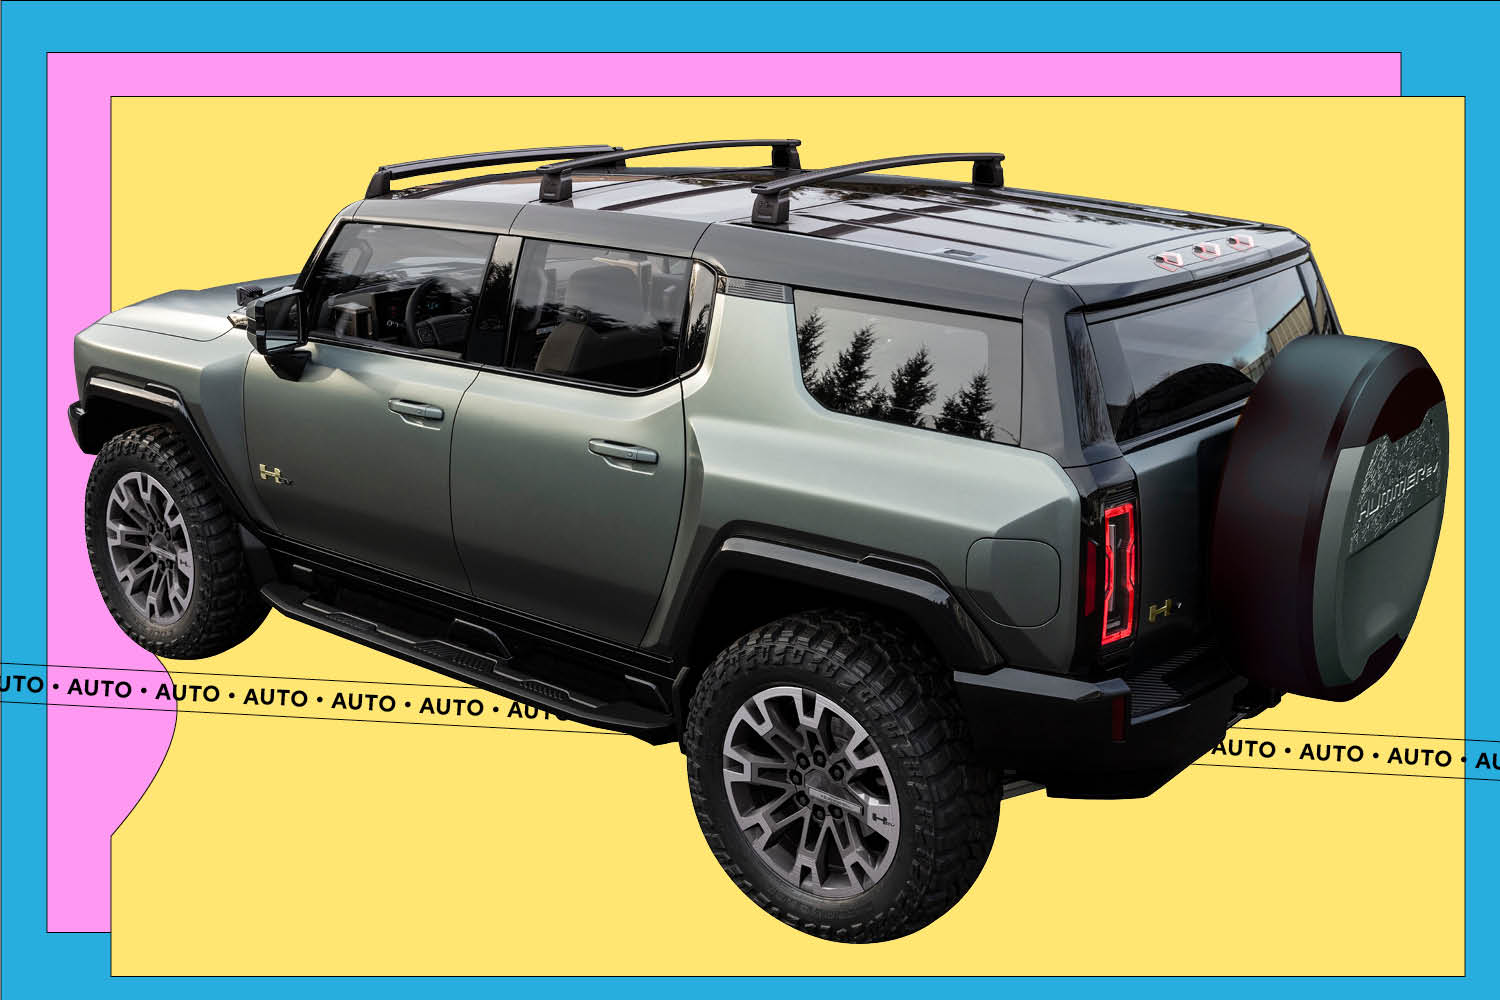 Best Auto Innovation of the year GMC Electric Hummer